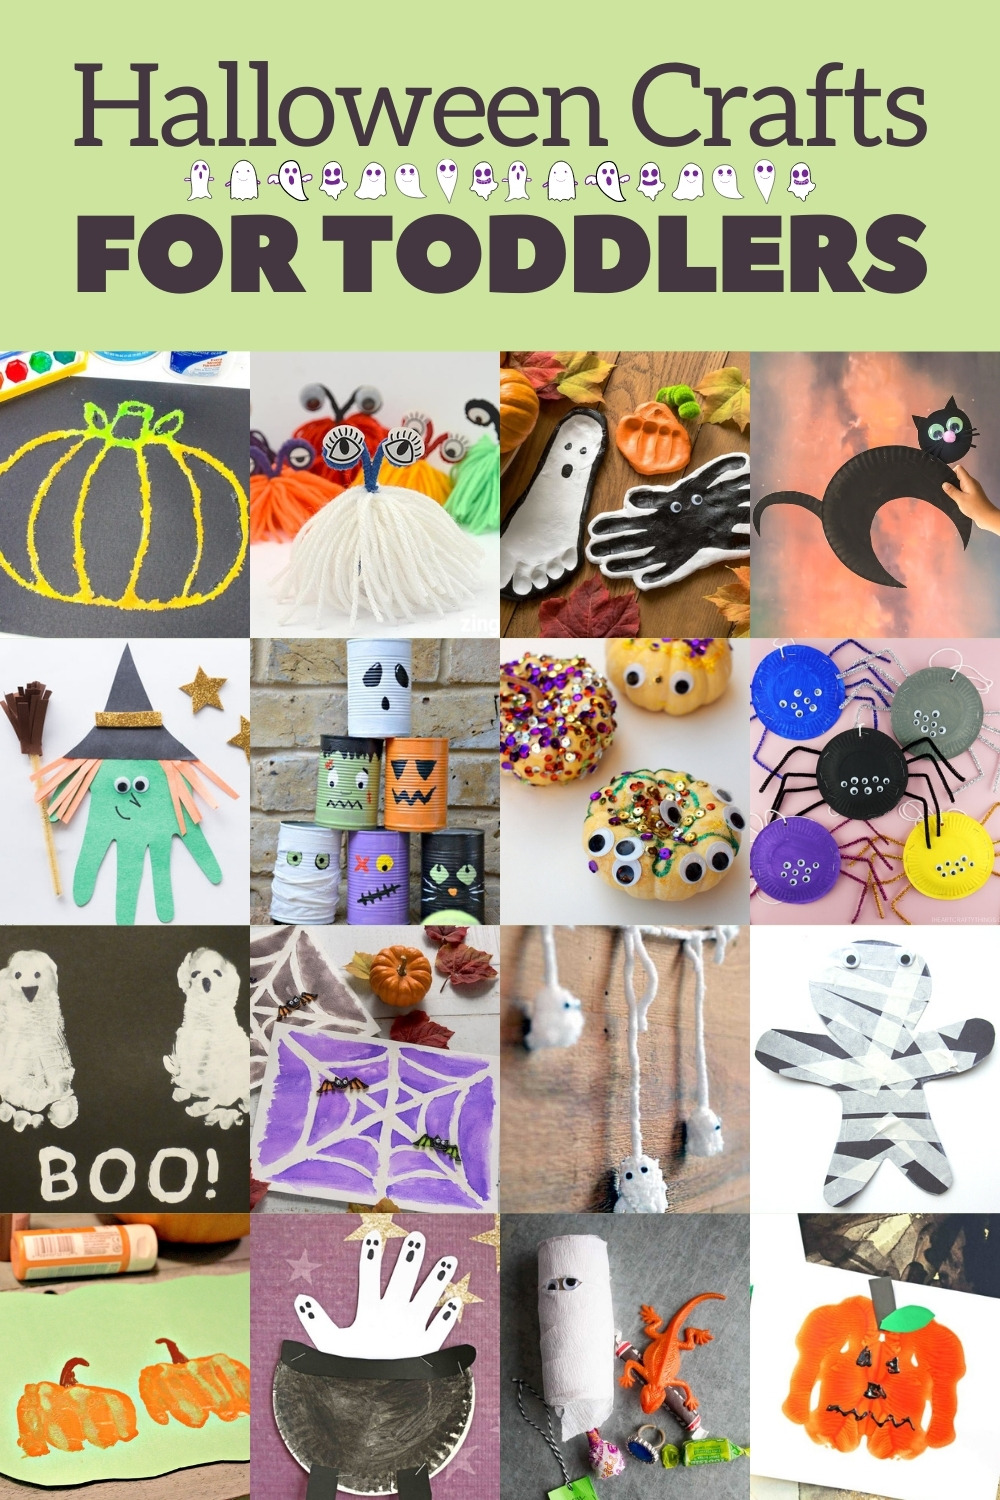 Halloween crafts perfect for toddlers